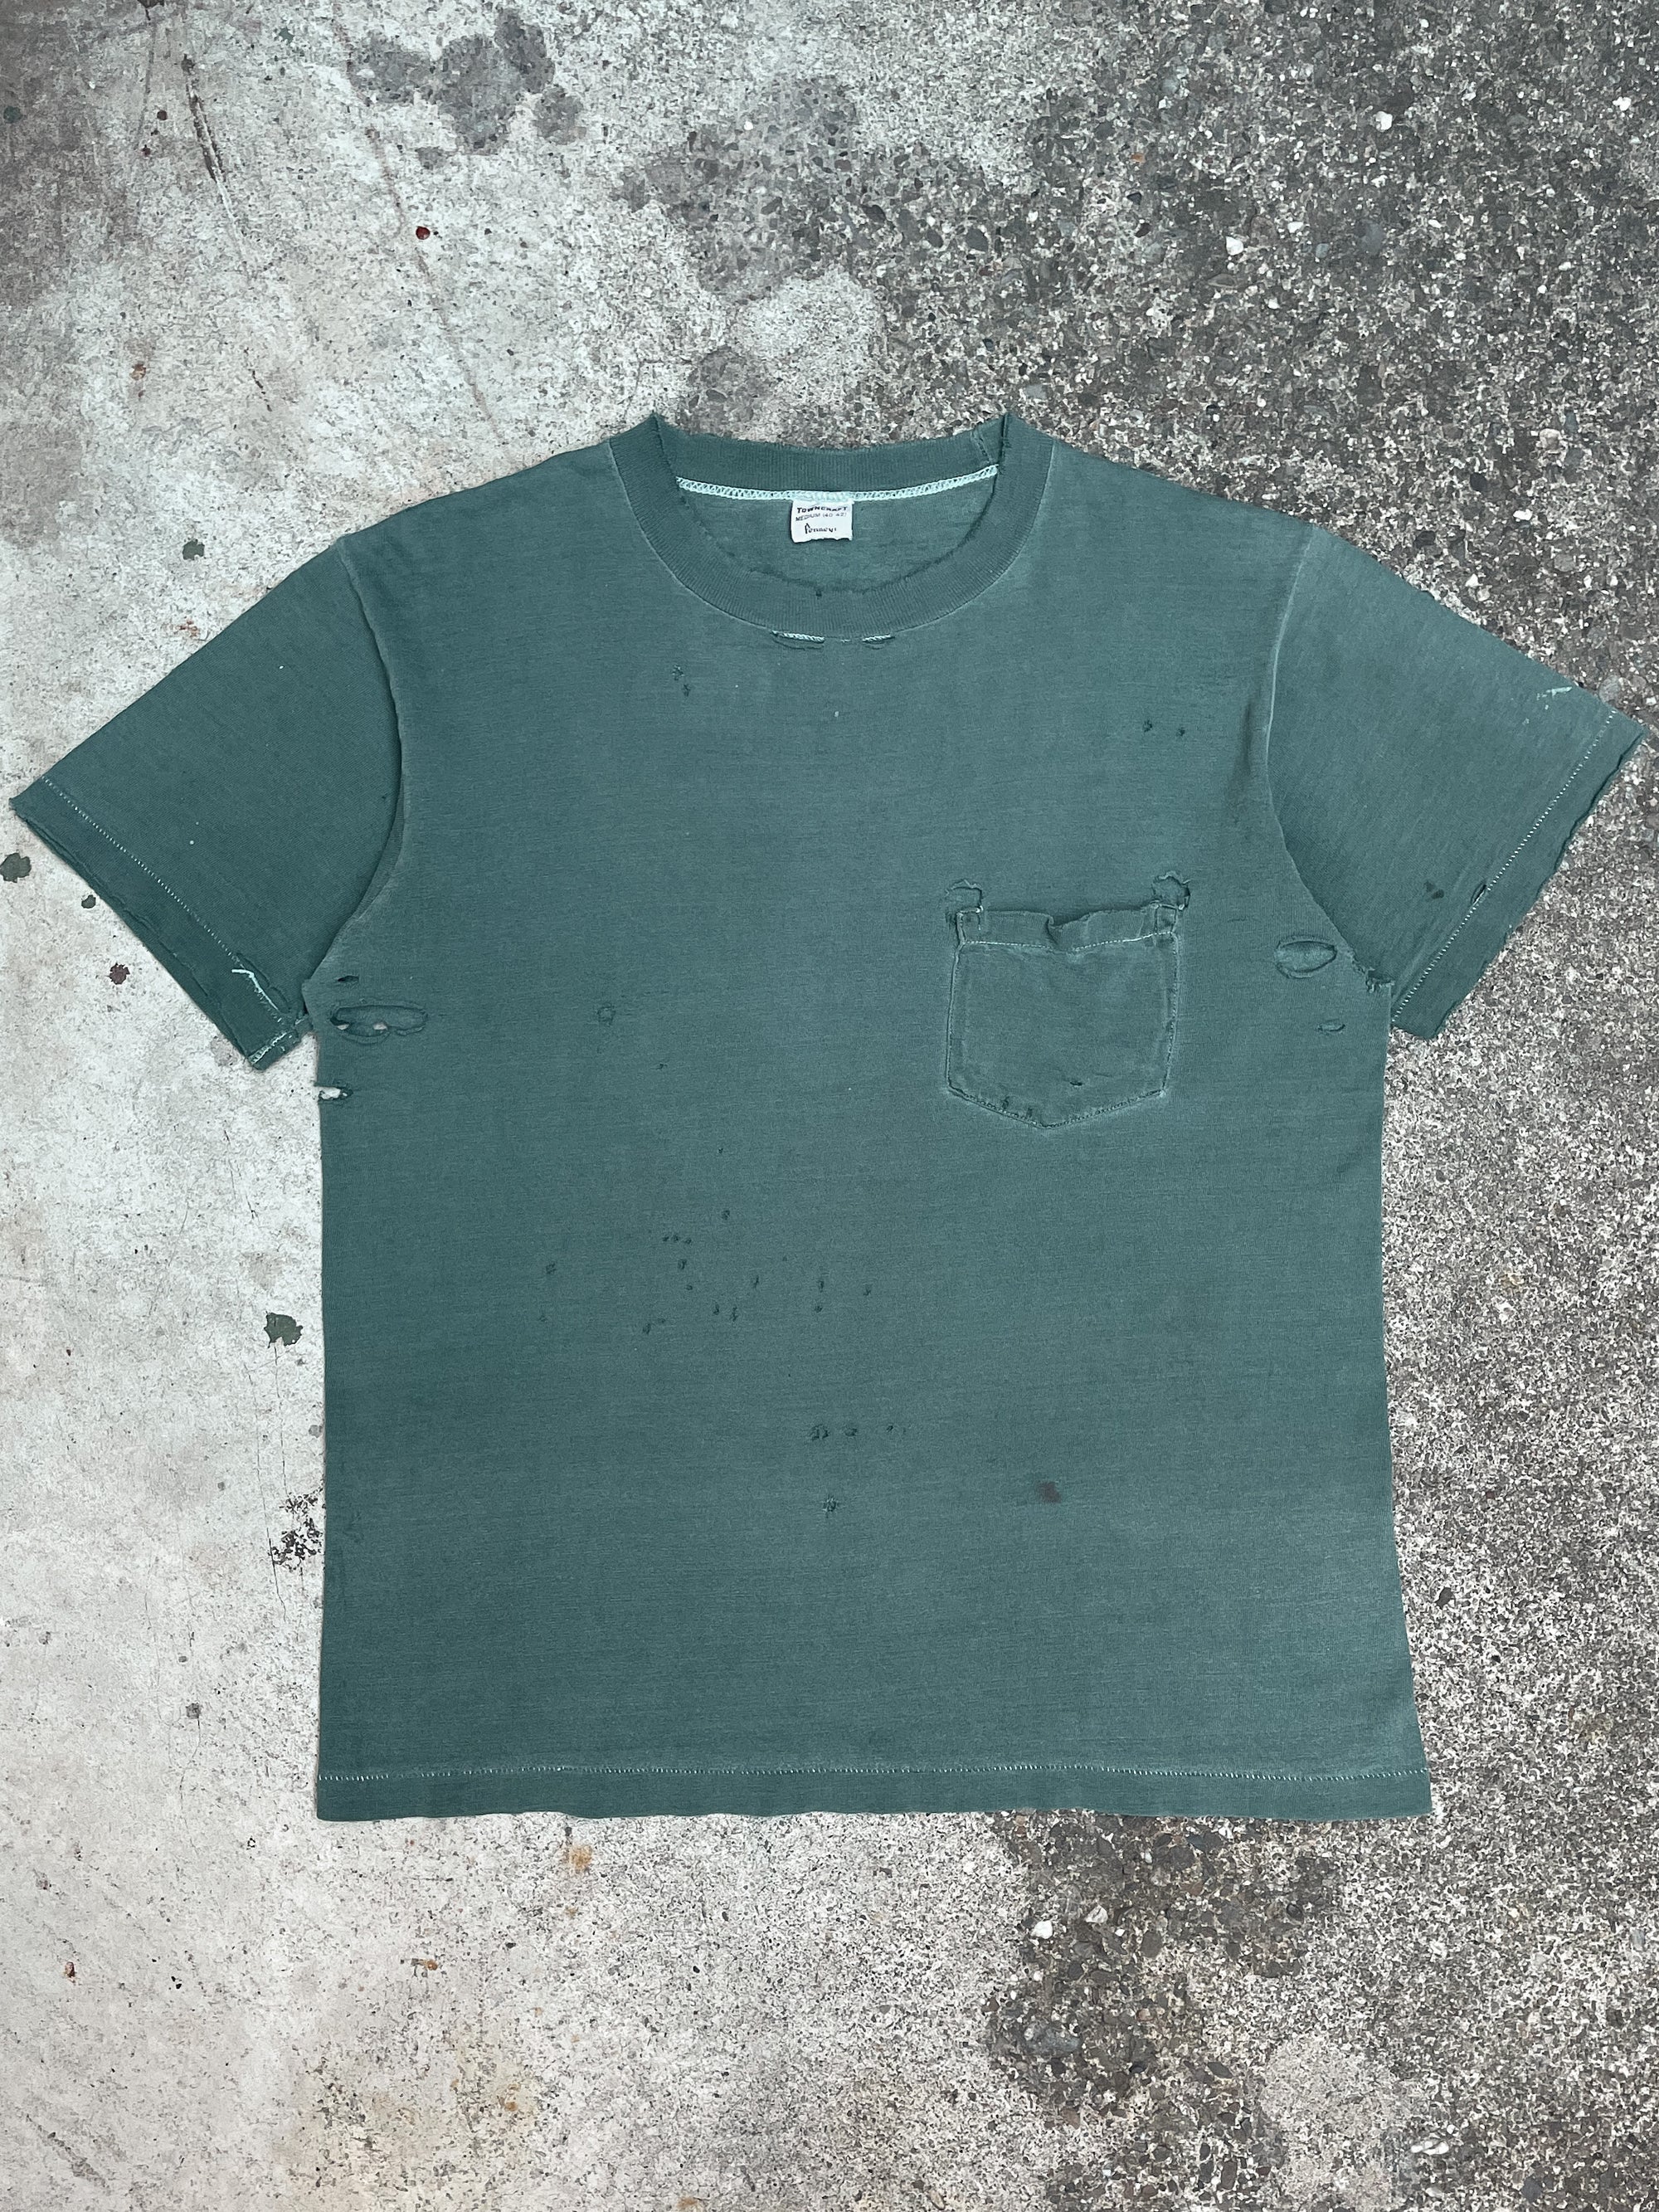 1960s Thrashed Faded Green Single Stitched Pocket Tee (M)